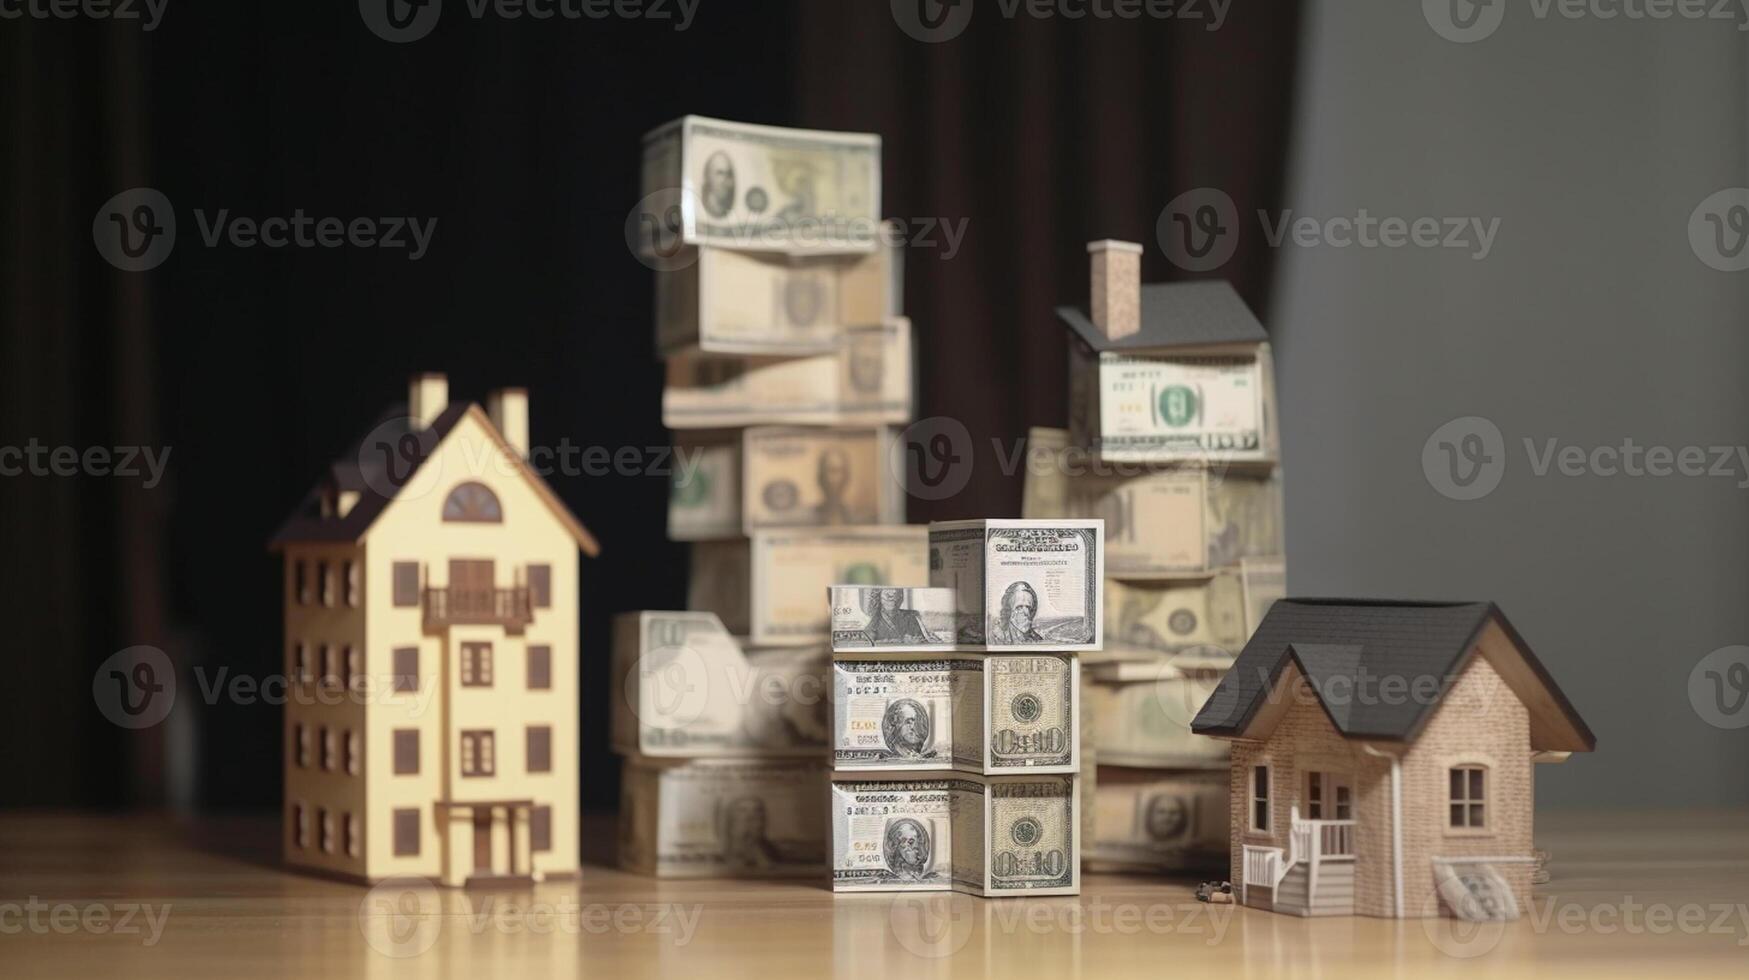 a stock of coins and house real estate and investment concept photo